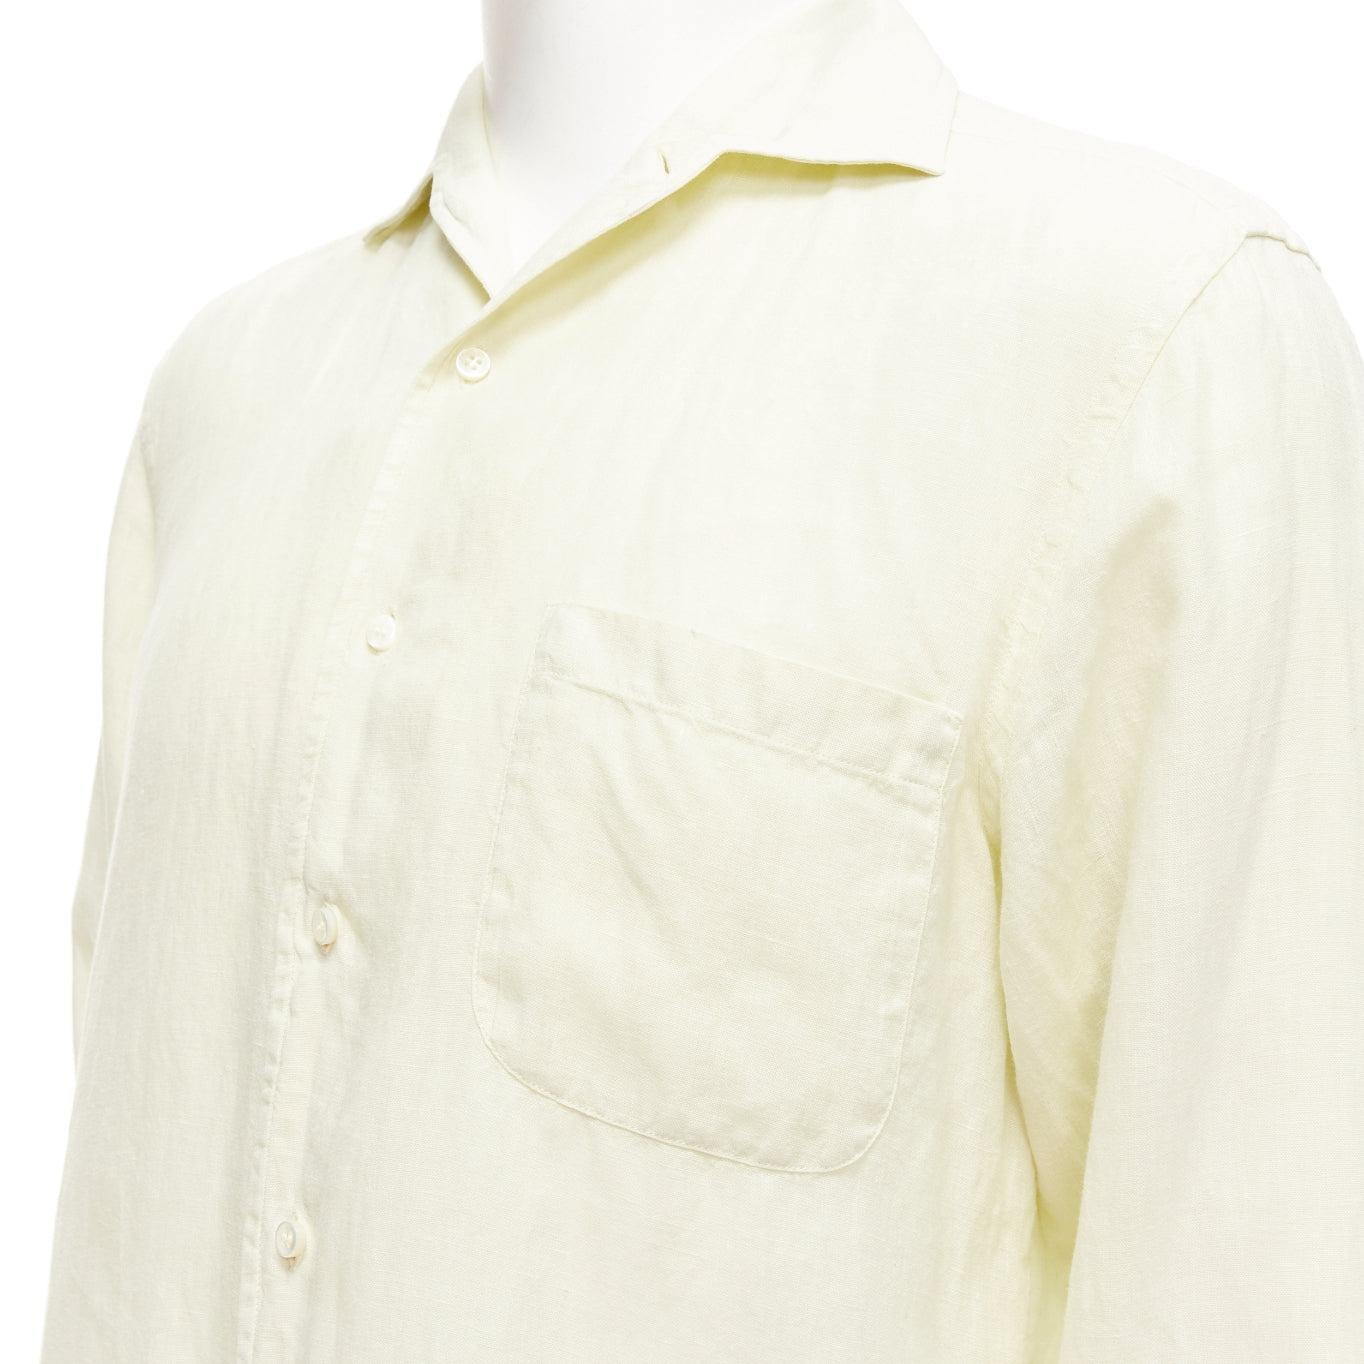 LORO PIANA 100% linen light yellow collared pocketed casual shirt S
Reference: YIKK/A00019
Brand: Loro Piana
Material: Linen
Color: Yellow
Pattern: Solid
Closure: Button
Extra Details: Pocketed. Back yoke.
Made in: Italy

CONDITION:
Condition: